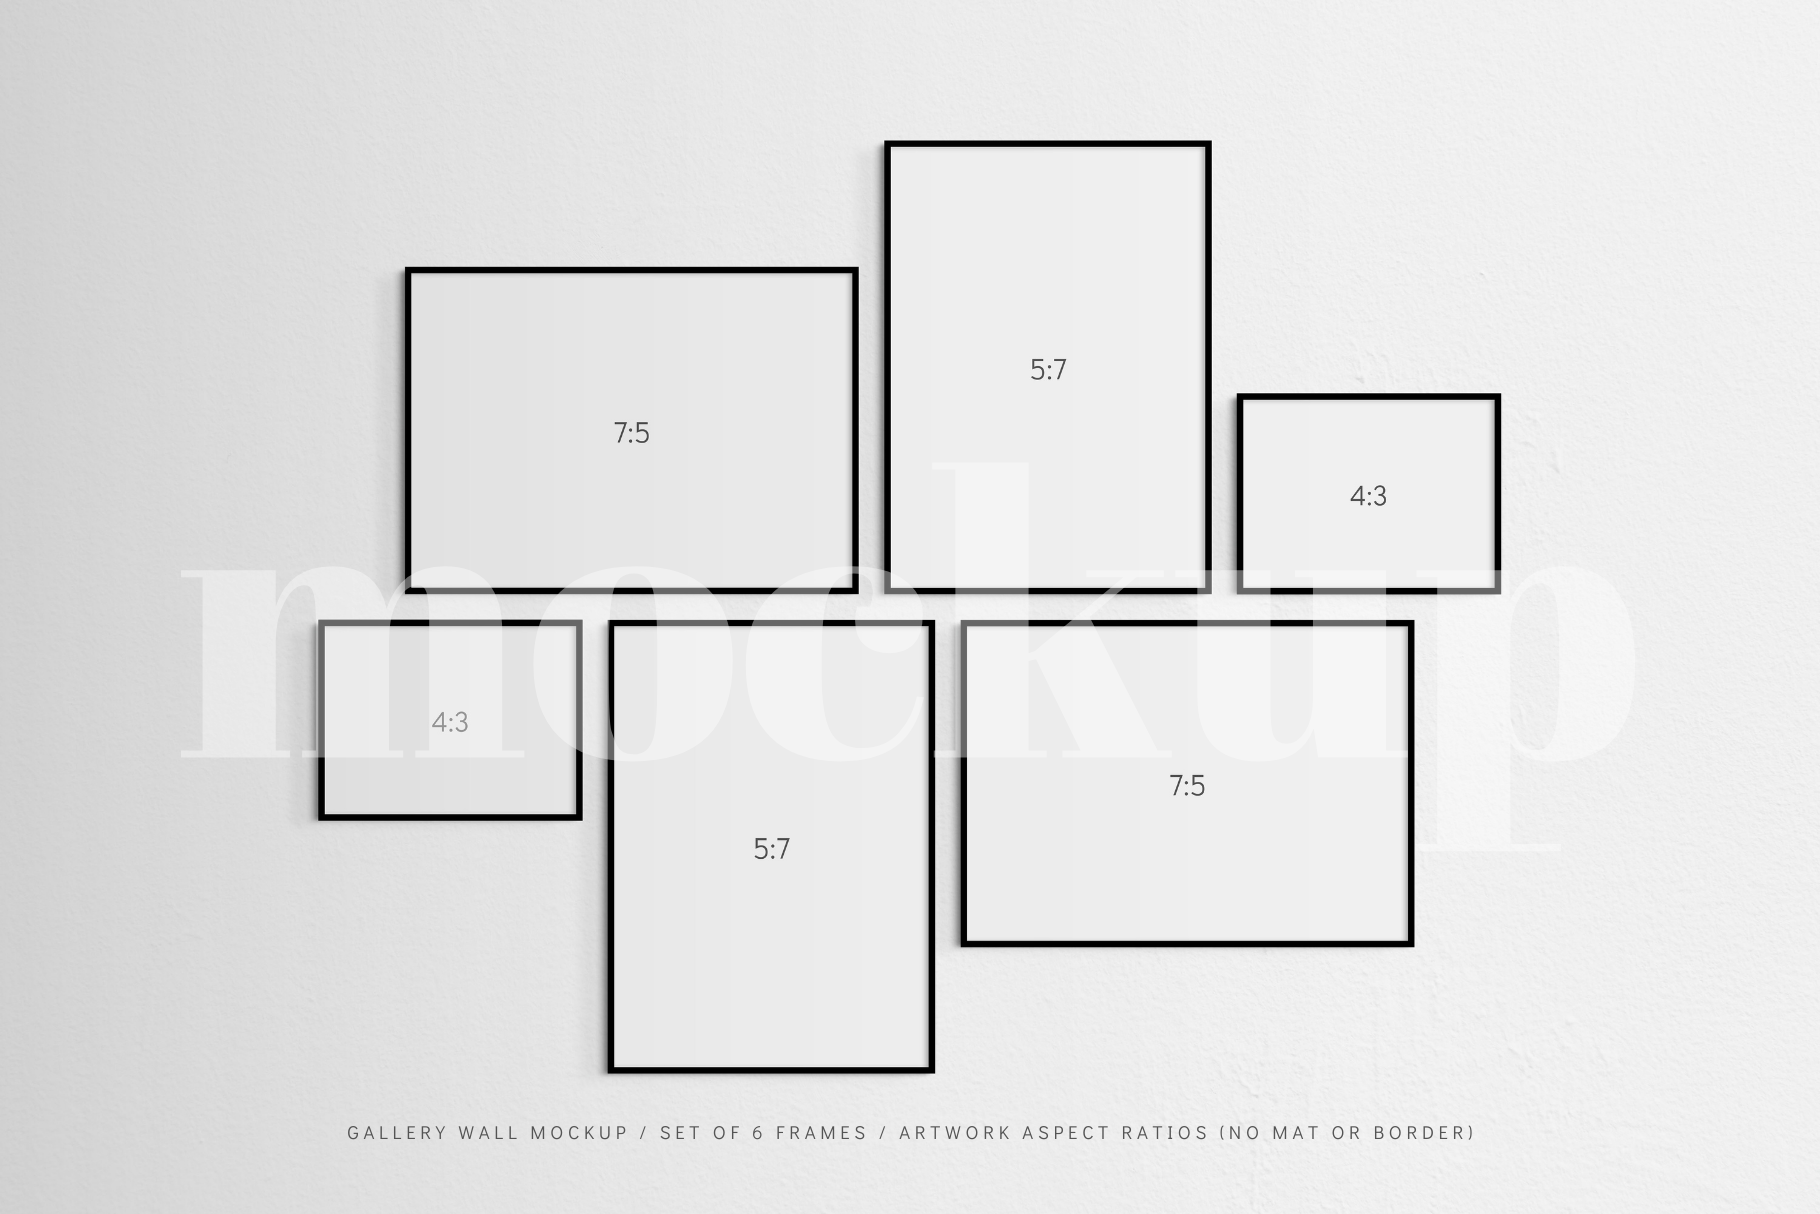 A gallery wall mockup that features a set of 6 horizontal and vertical black frames.